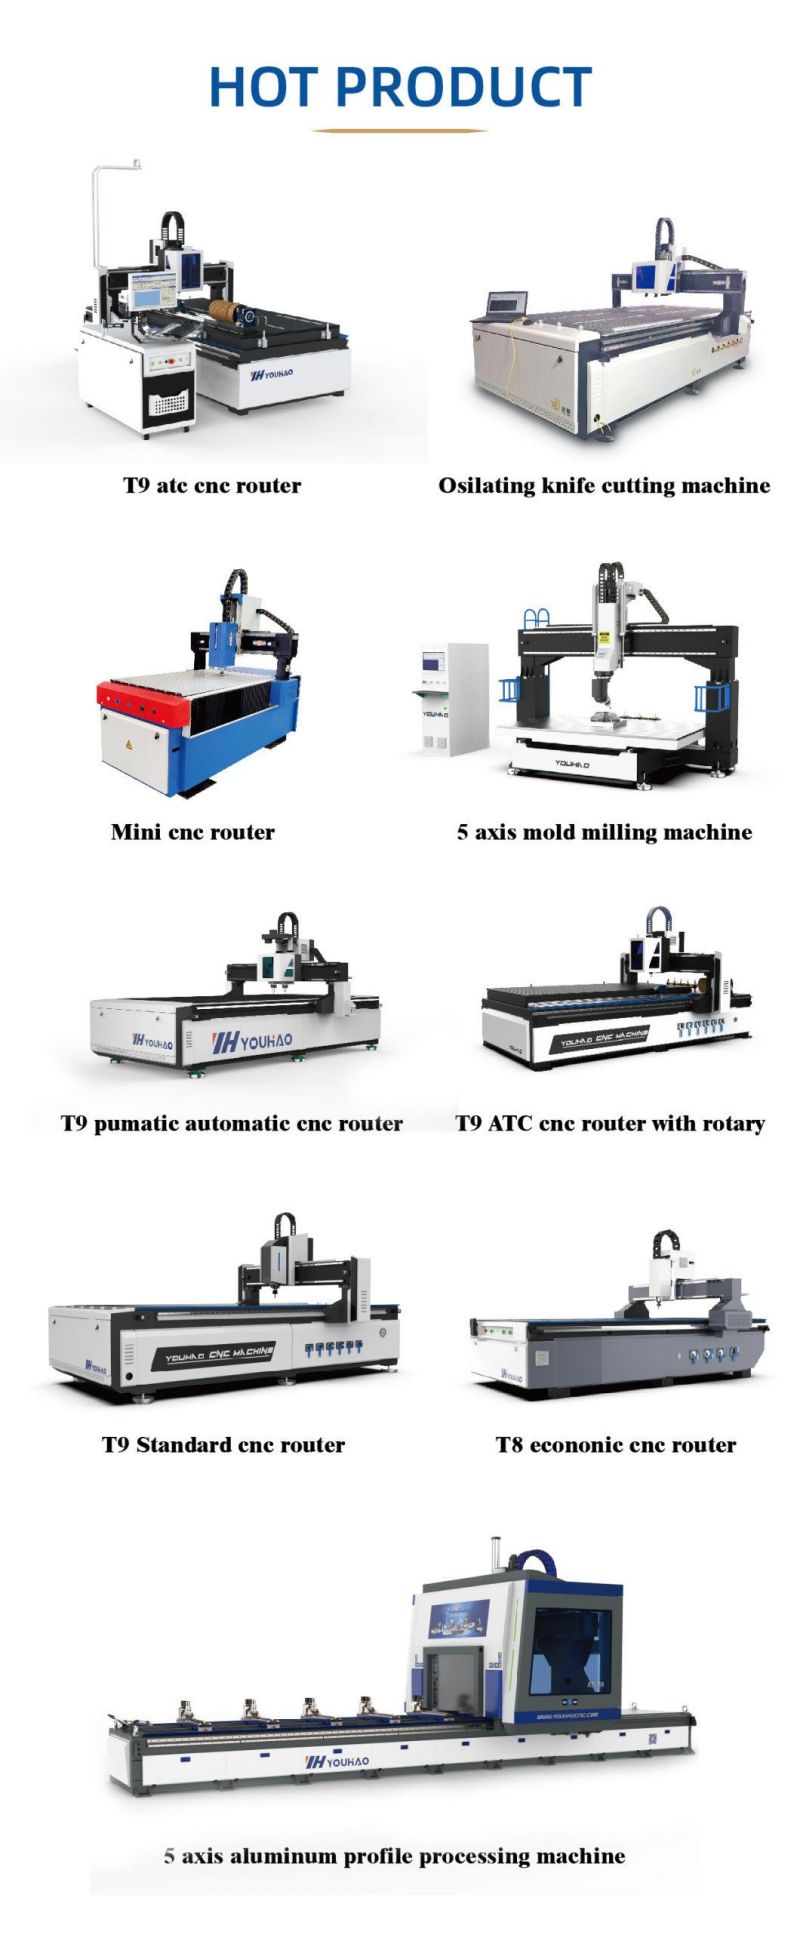 CNC Router Woodworking Machine Wood Engraving CNC Router Laser Cutter Furniture Making Machinery